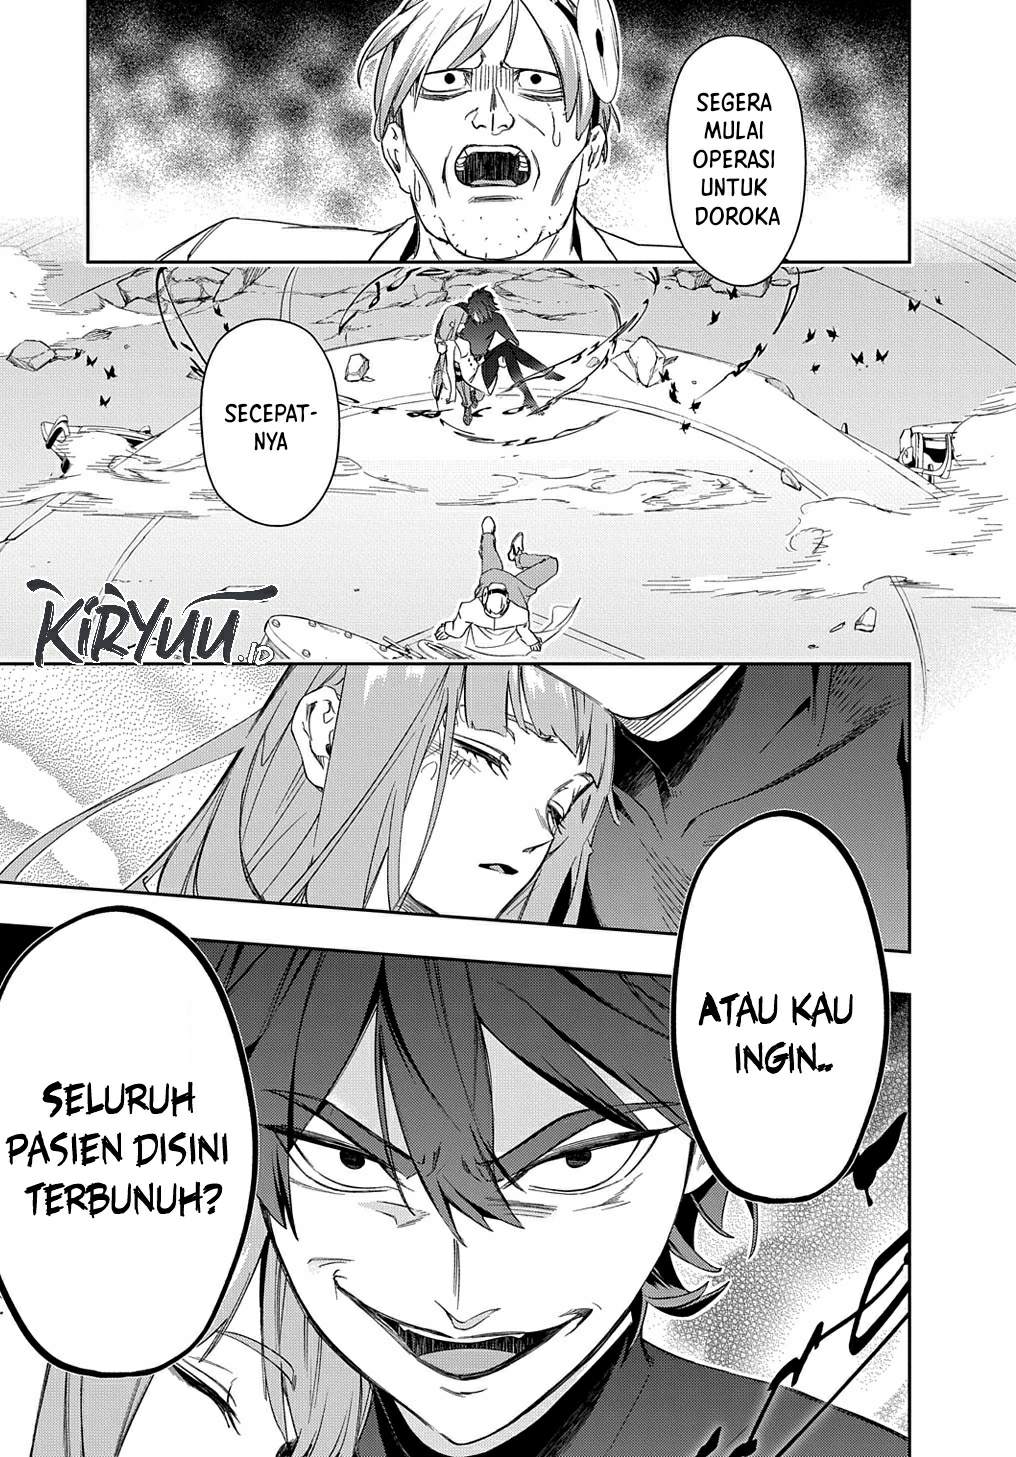 The Kingdoms of Ruin Chapter 40 Bahasa Indonesia